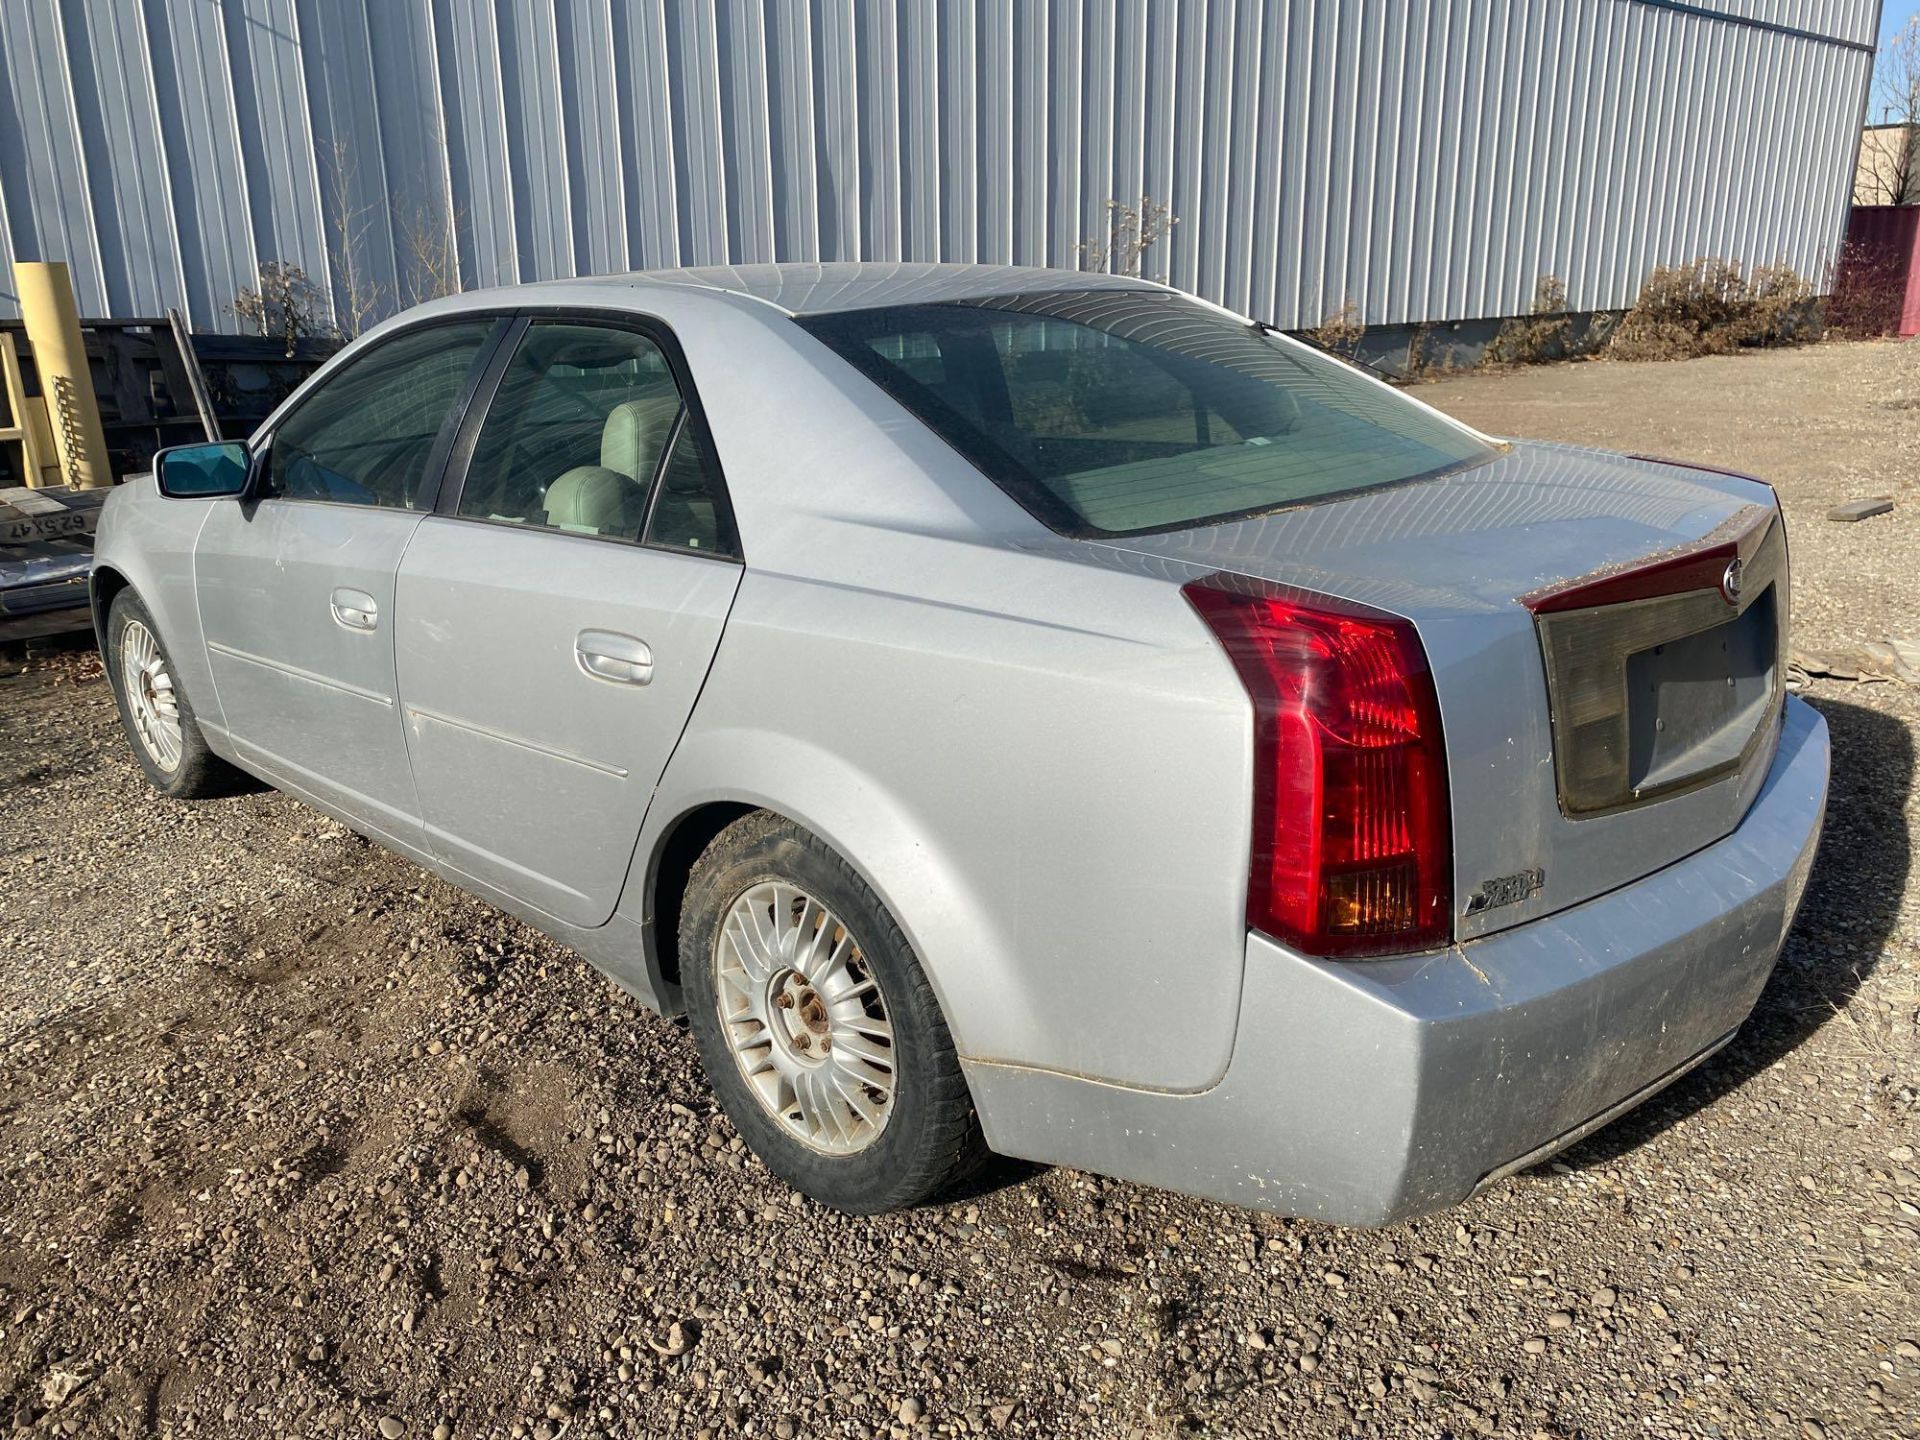 2003 Cadillac CTS Passenger Car, VIN # 1G6DM57N030150797**Located @ 14510 124ave Edmonton** - Image 4 of 10